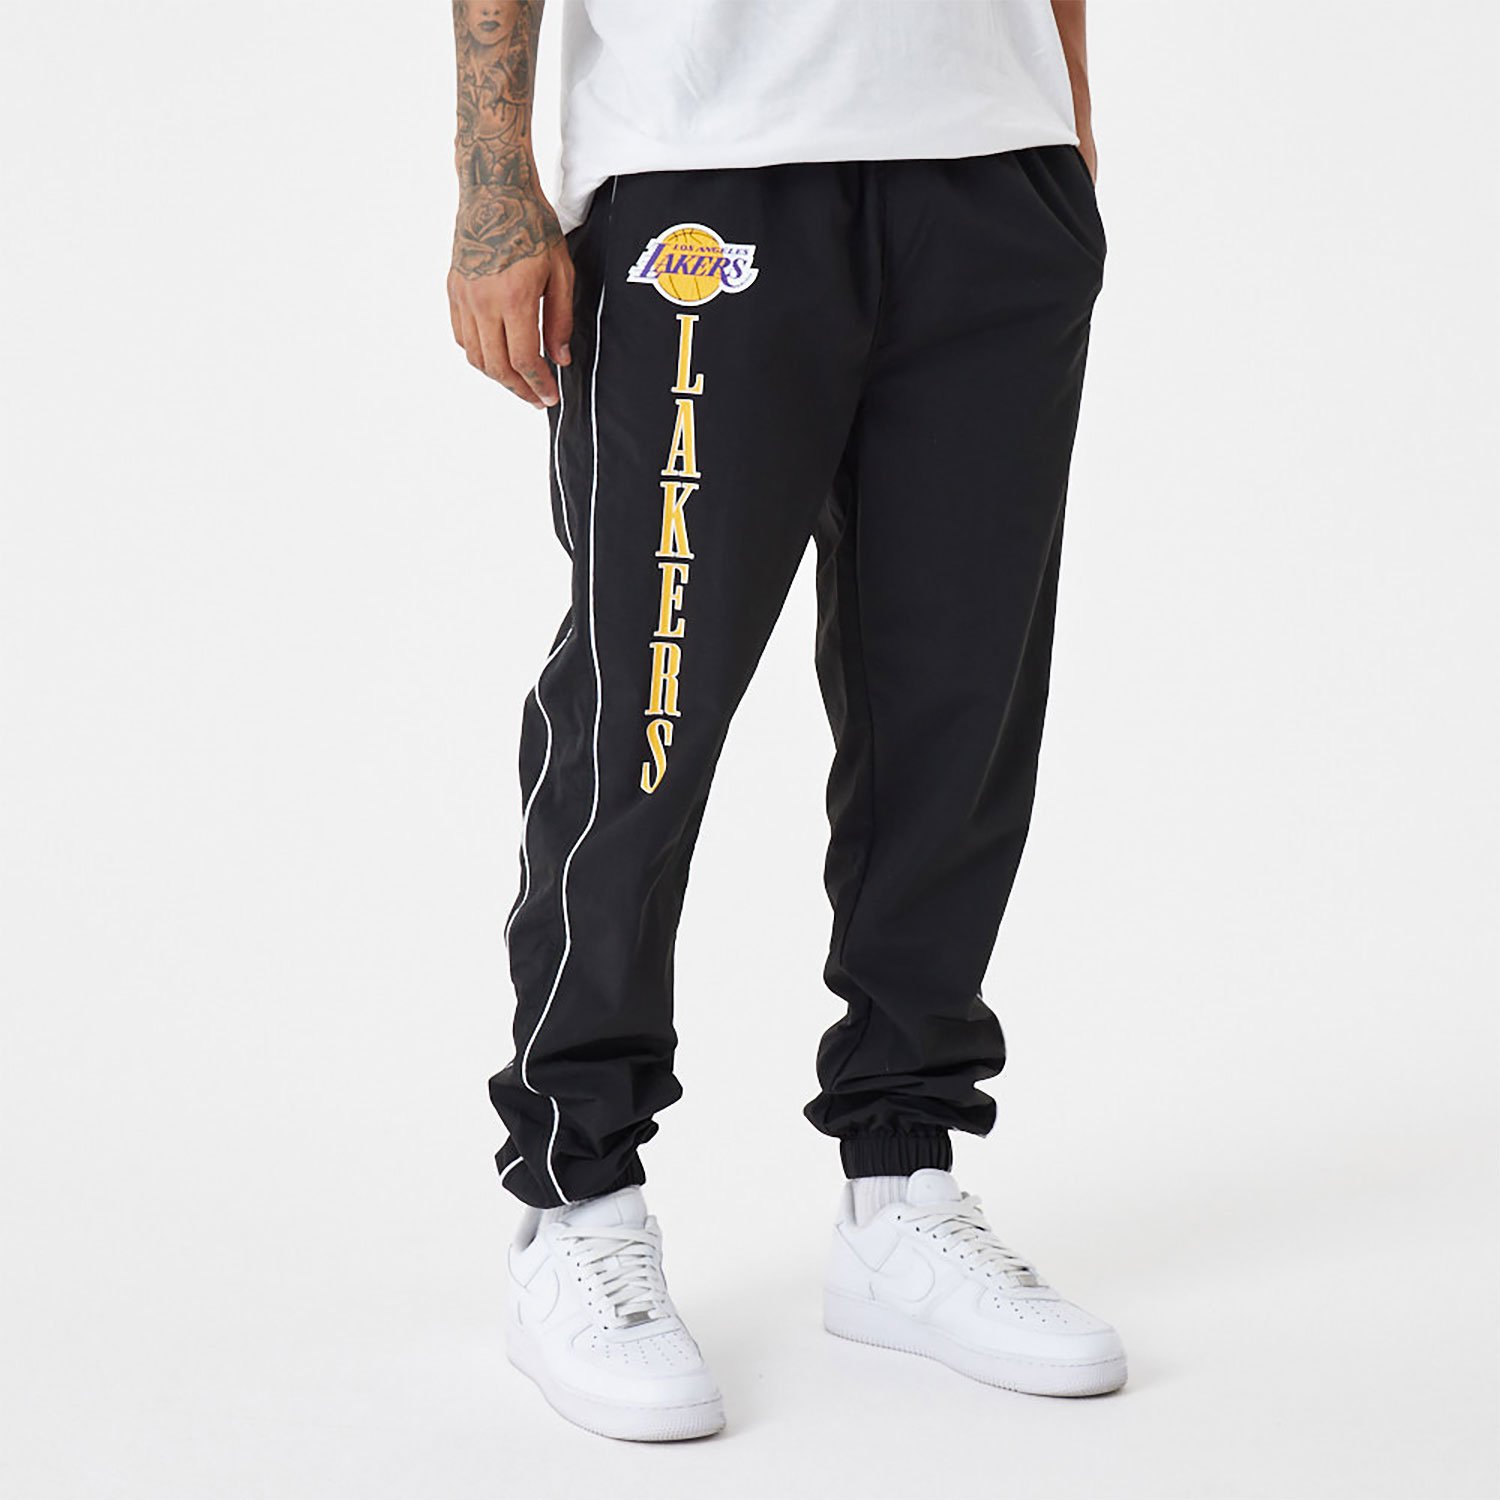 Nba street track pant offer at Factorie